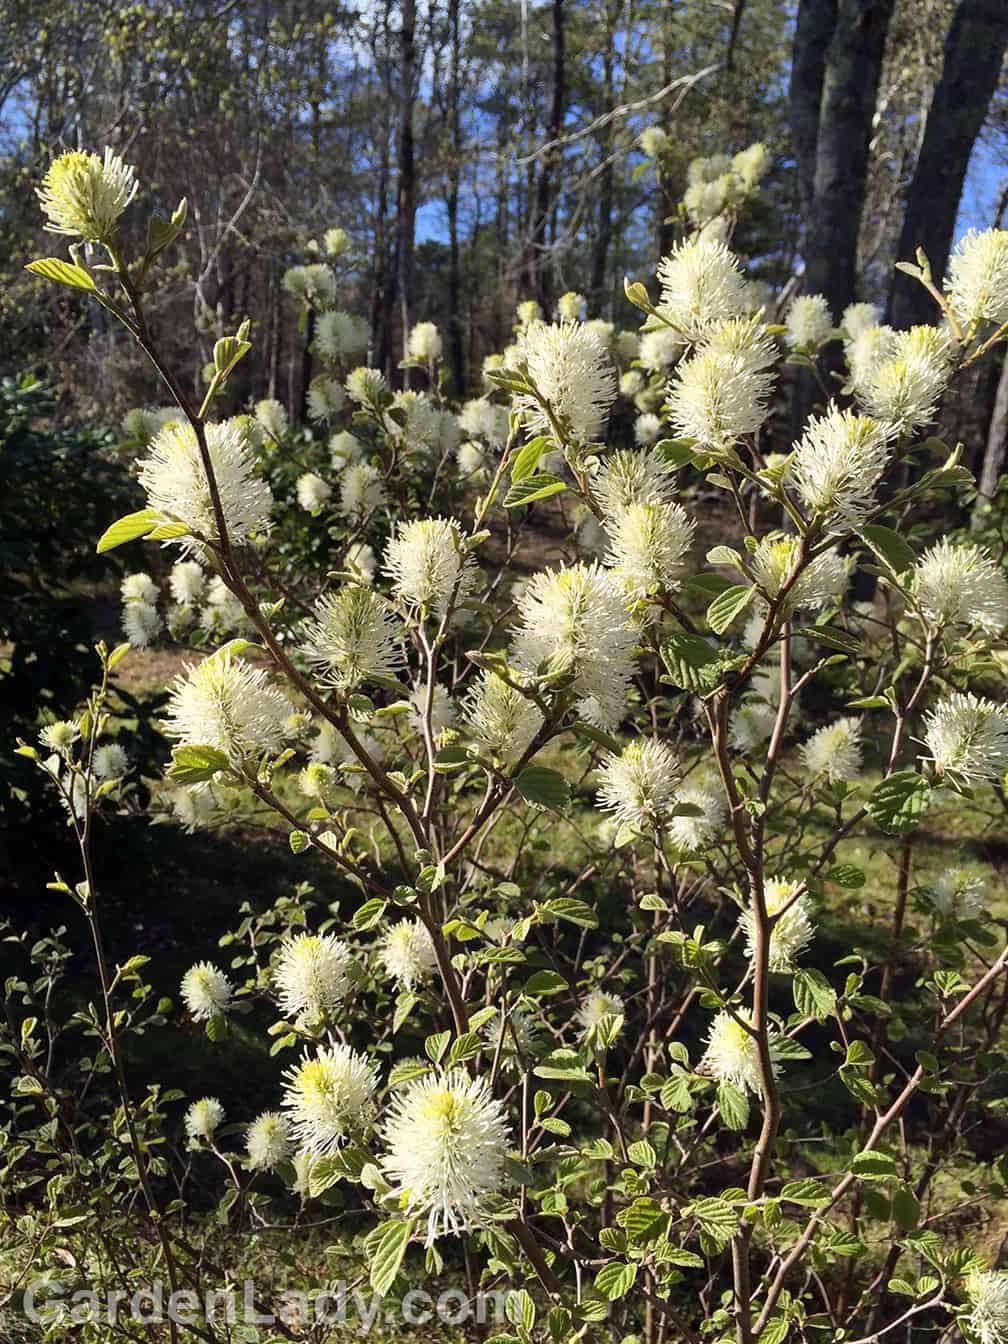 For several weeks in the early spring Fothergilla flowers are also cheerful.